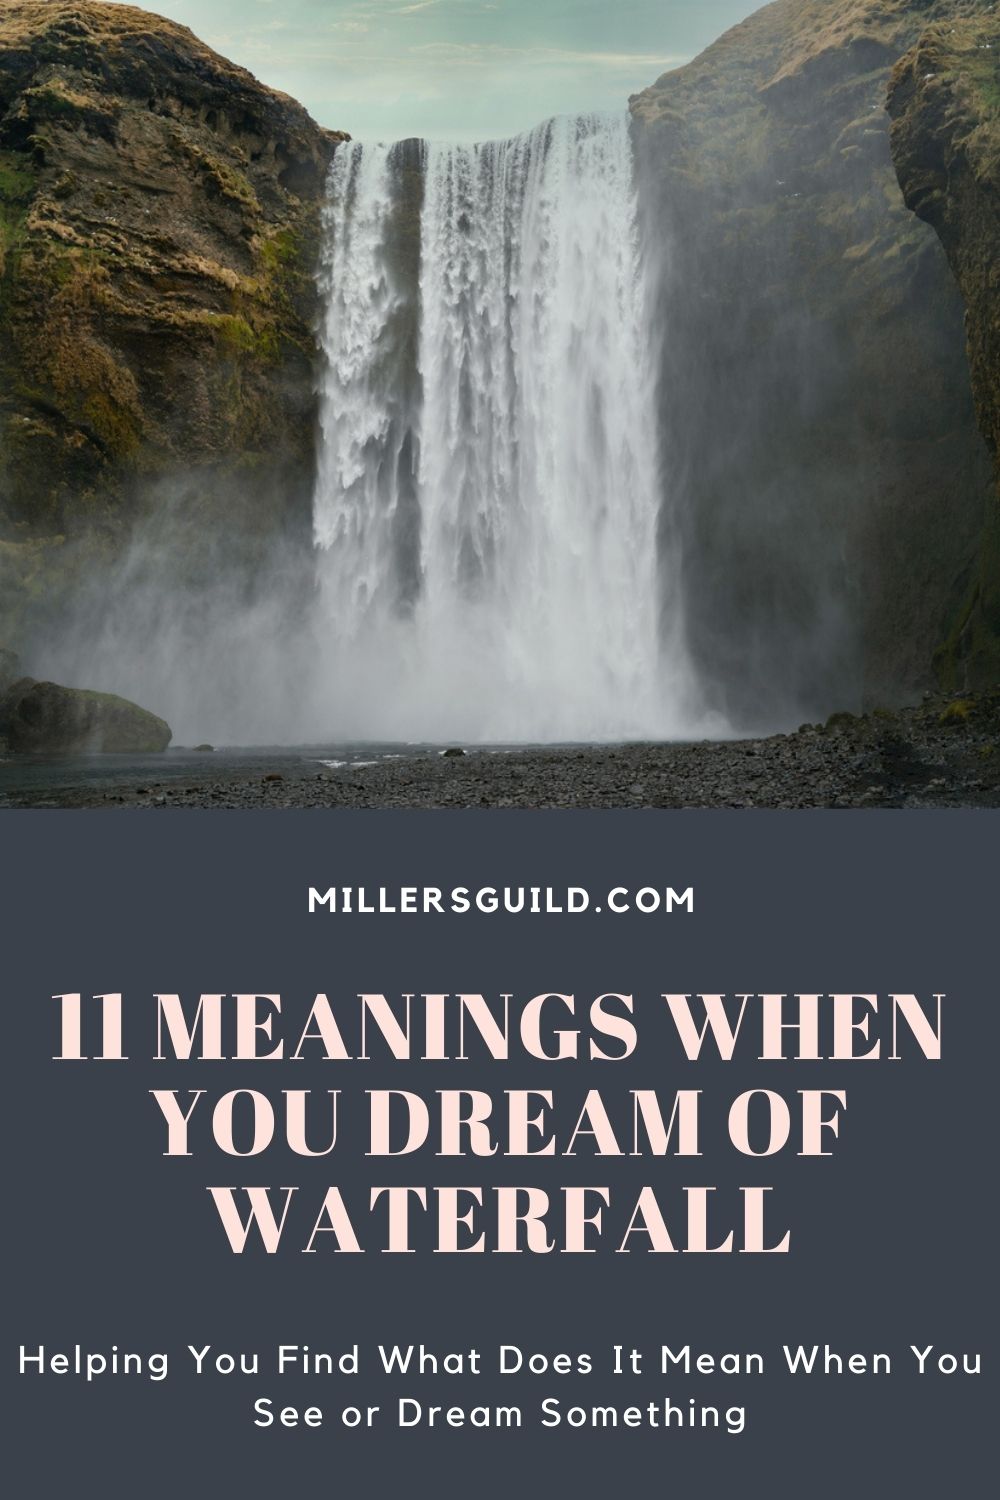 11 Meanings When You Dream of Waterfall 2